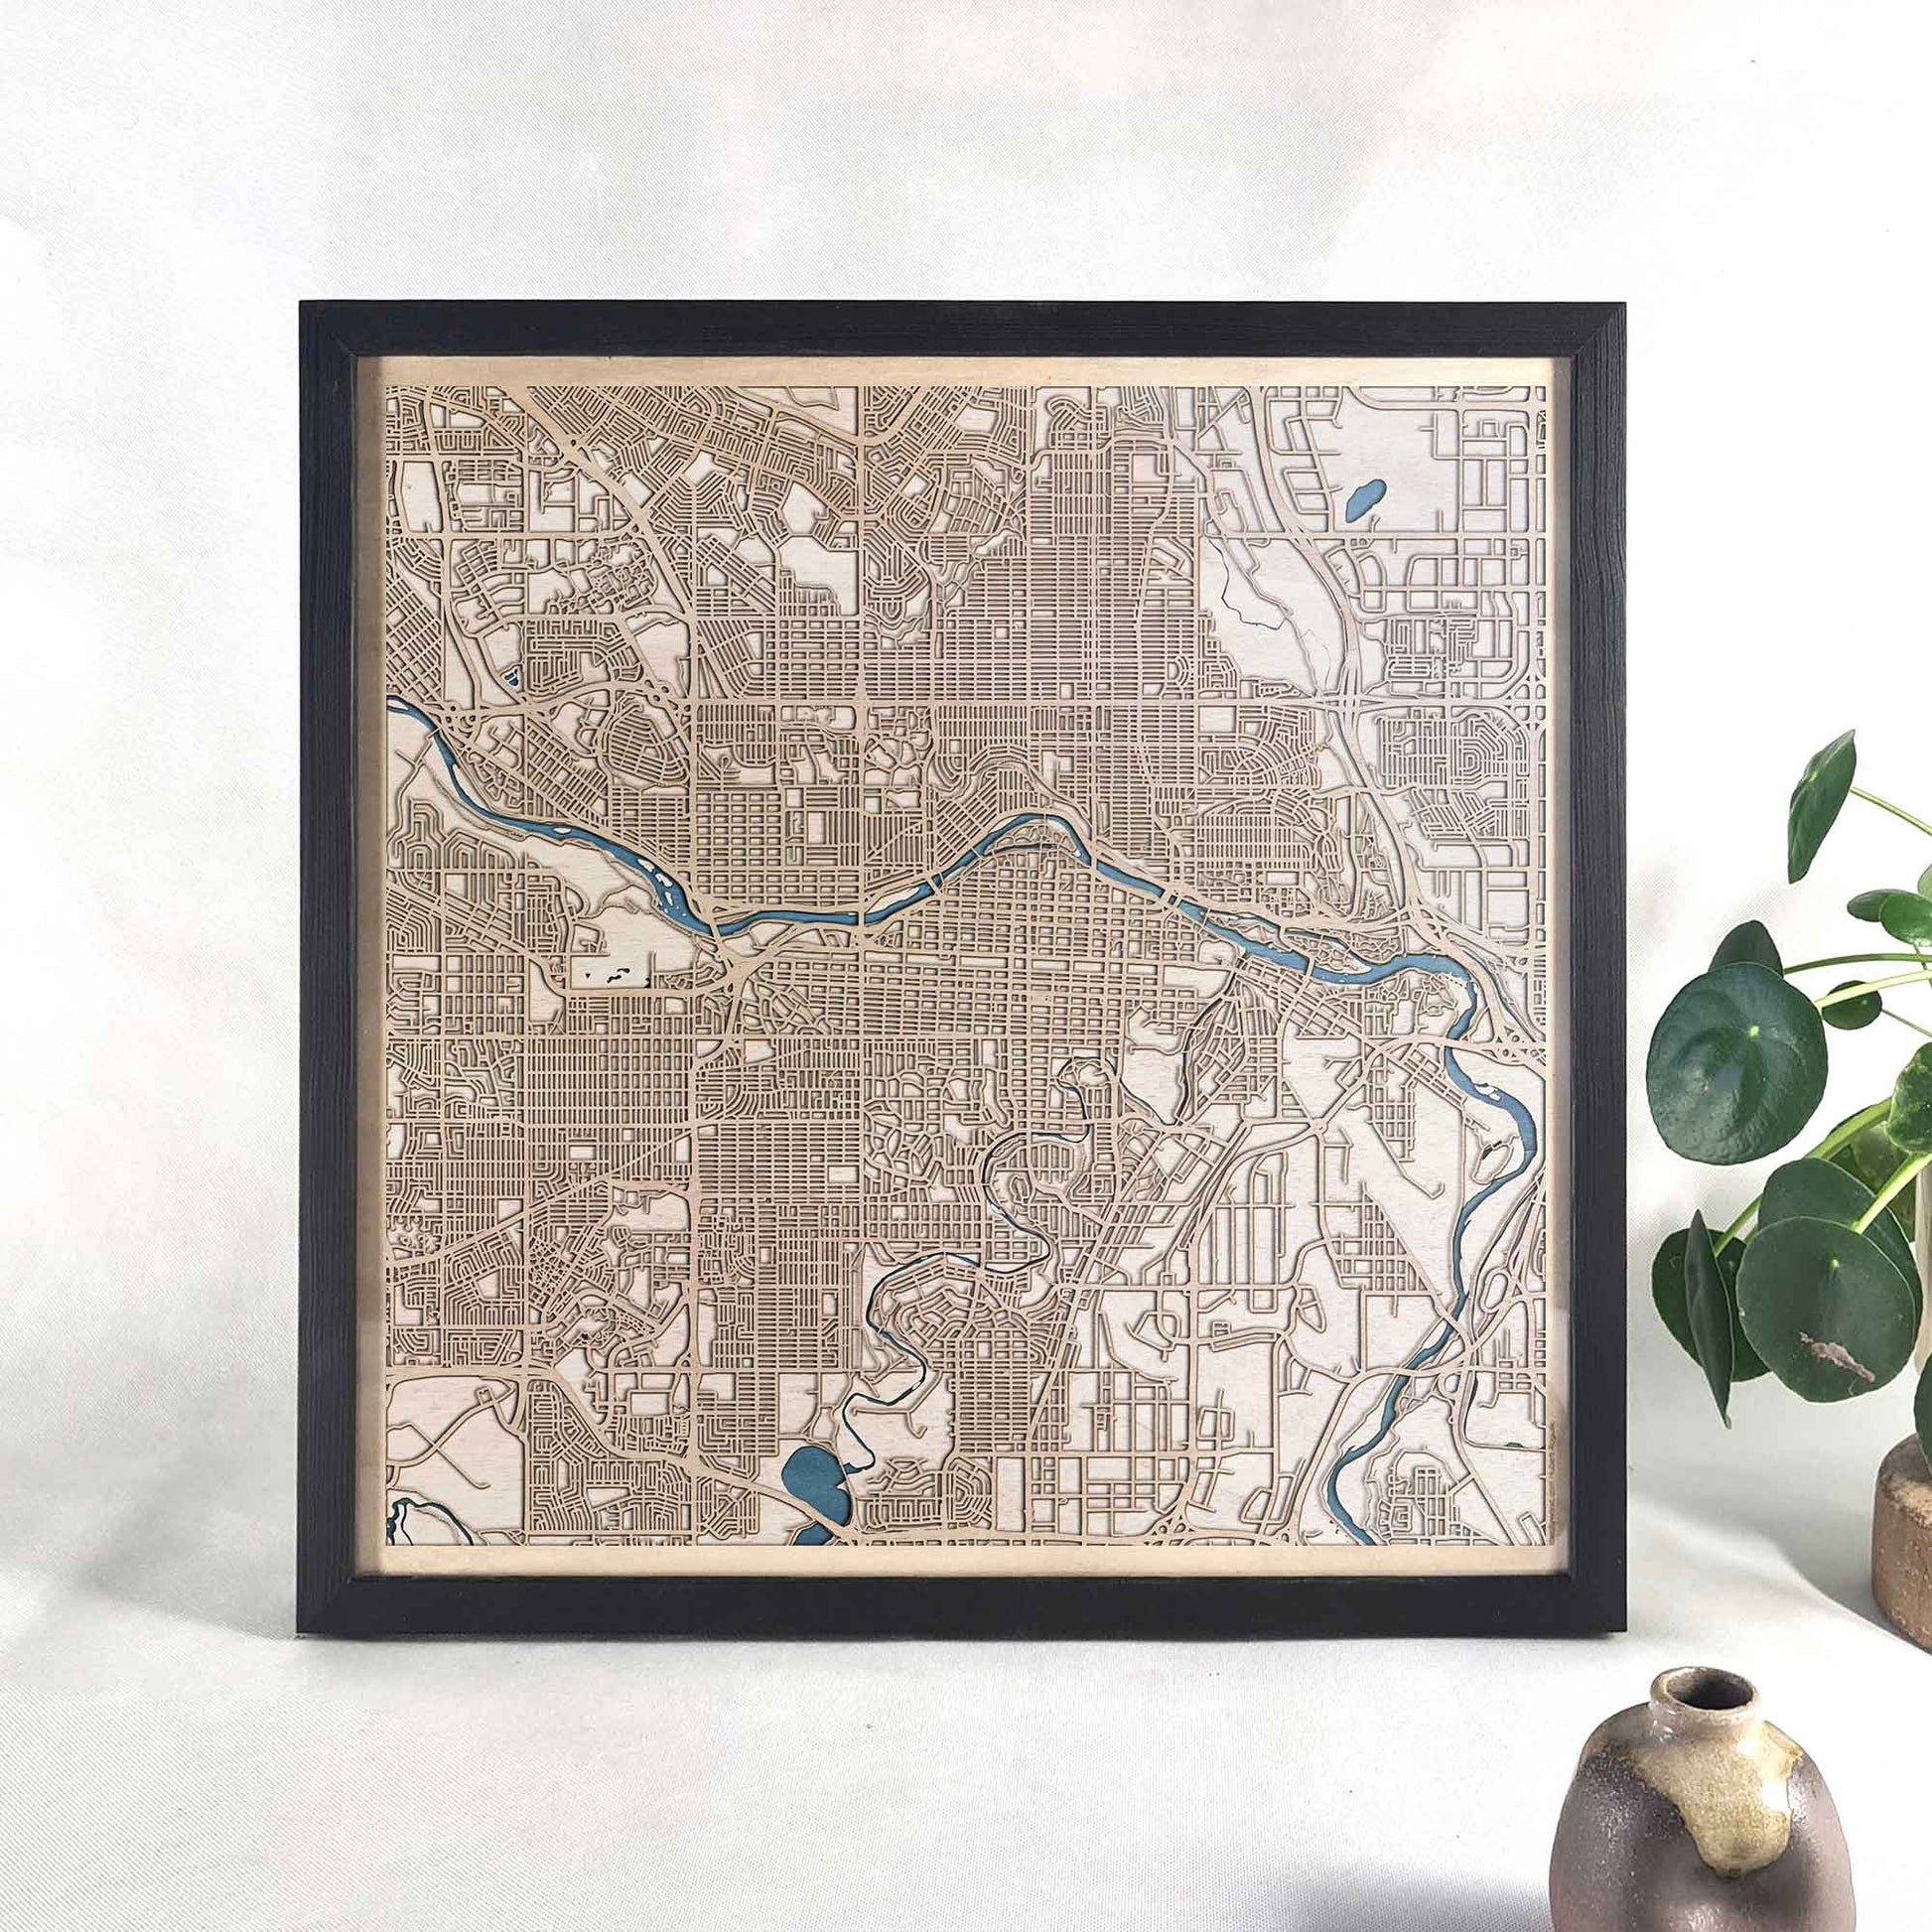 Calgary Wooden Map by CityWood - Custom Wood Map Art - Unique Laser Cut Engraved - Anniversary Gift